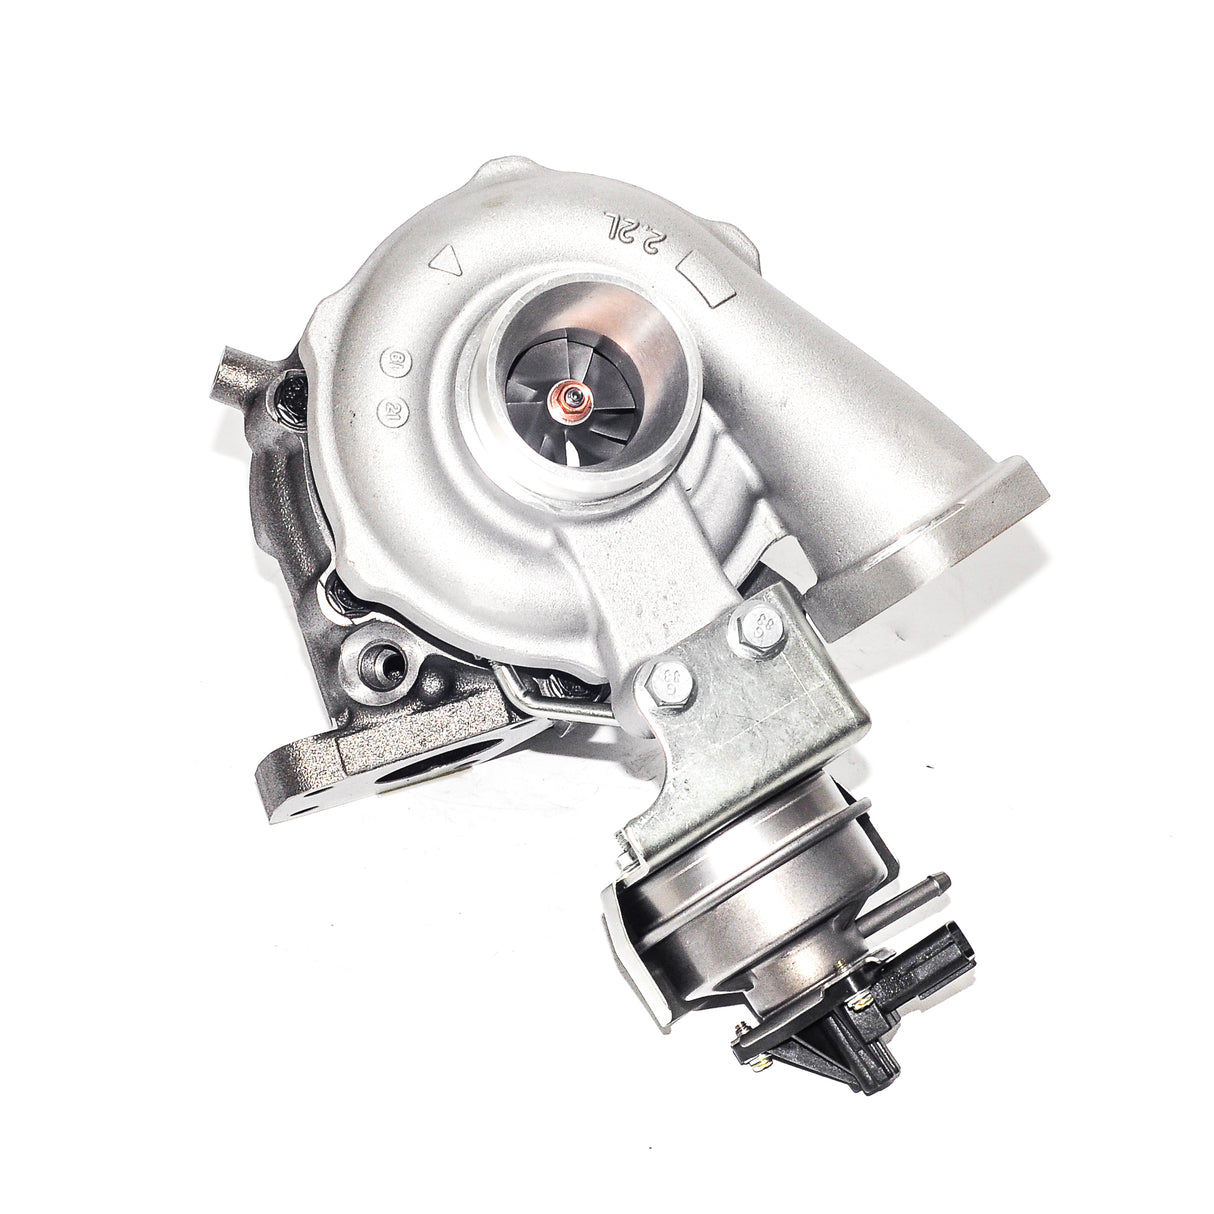 CCT Turbocharger To Suit Holden Captiva CG 2.2ltr 49477-01610